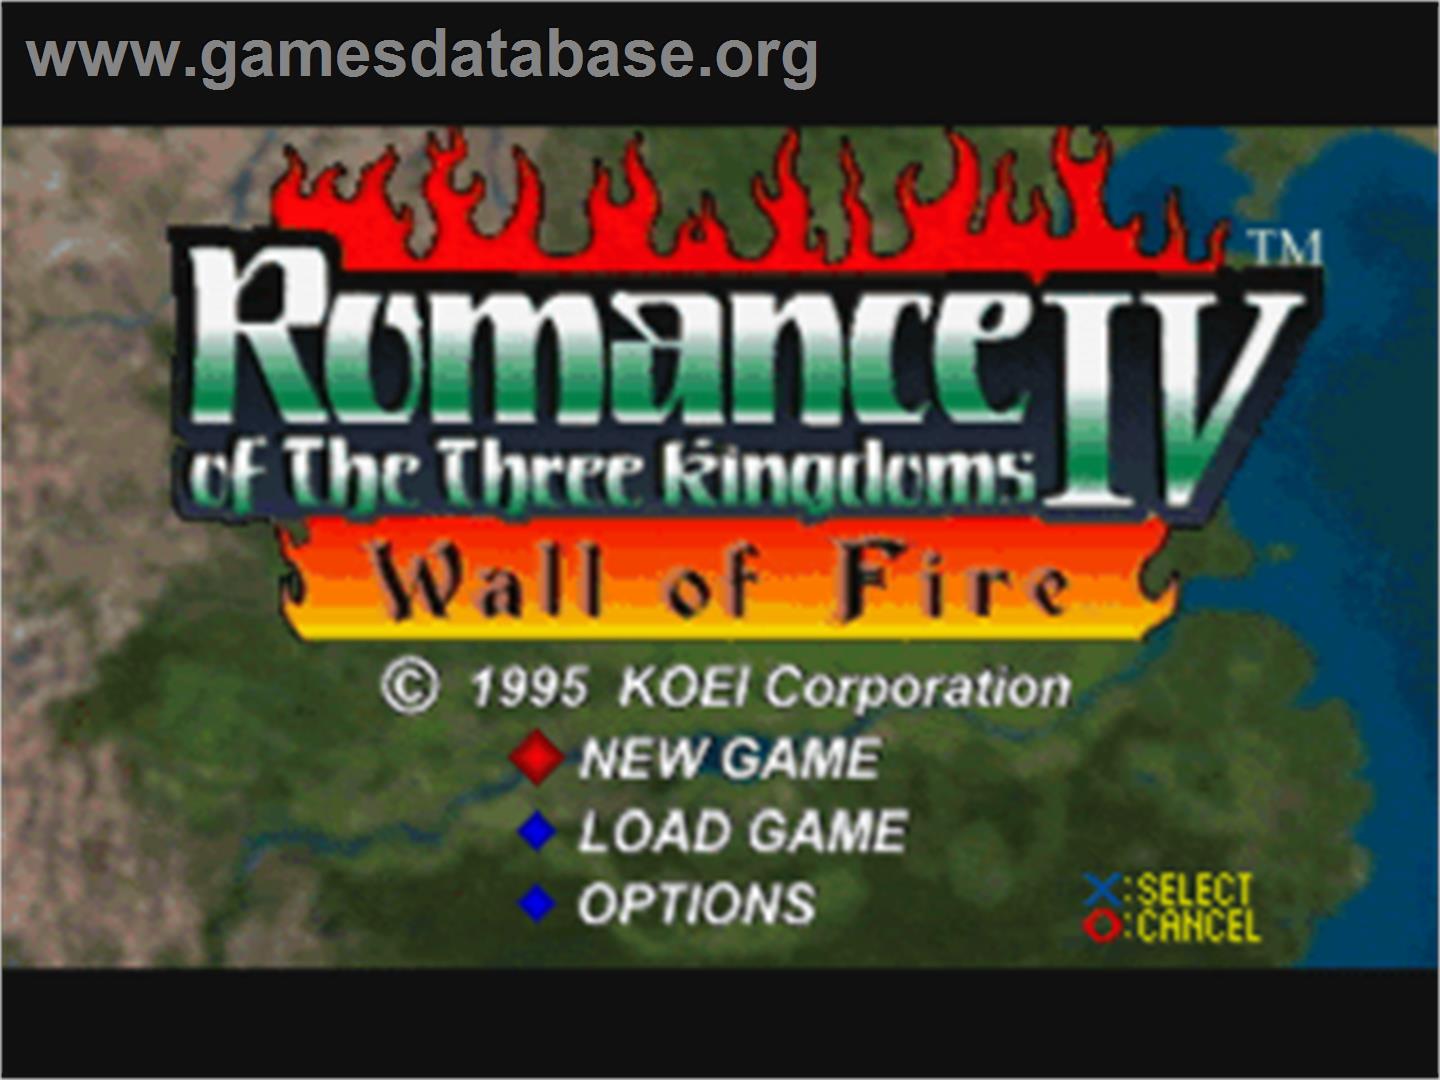 Romance of the Three Kingdoms IV: Wall of Fire - Sony Playstation - Artwork - Title Screen